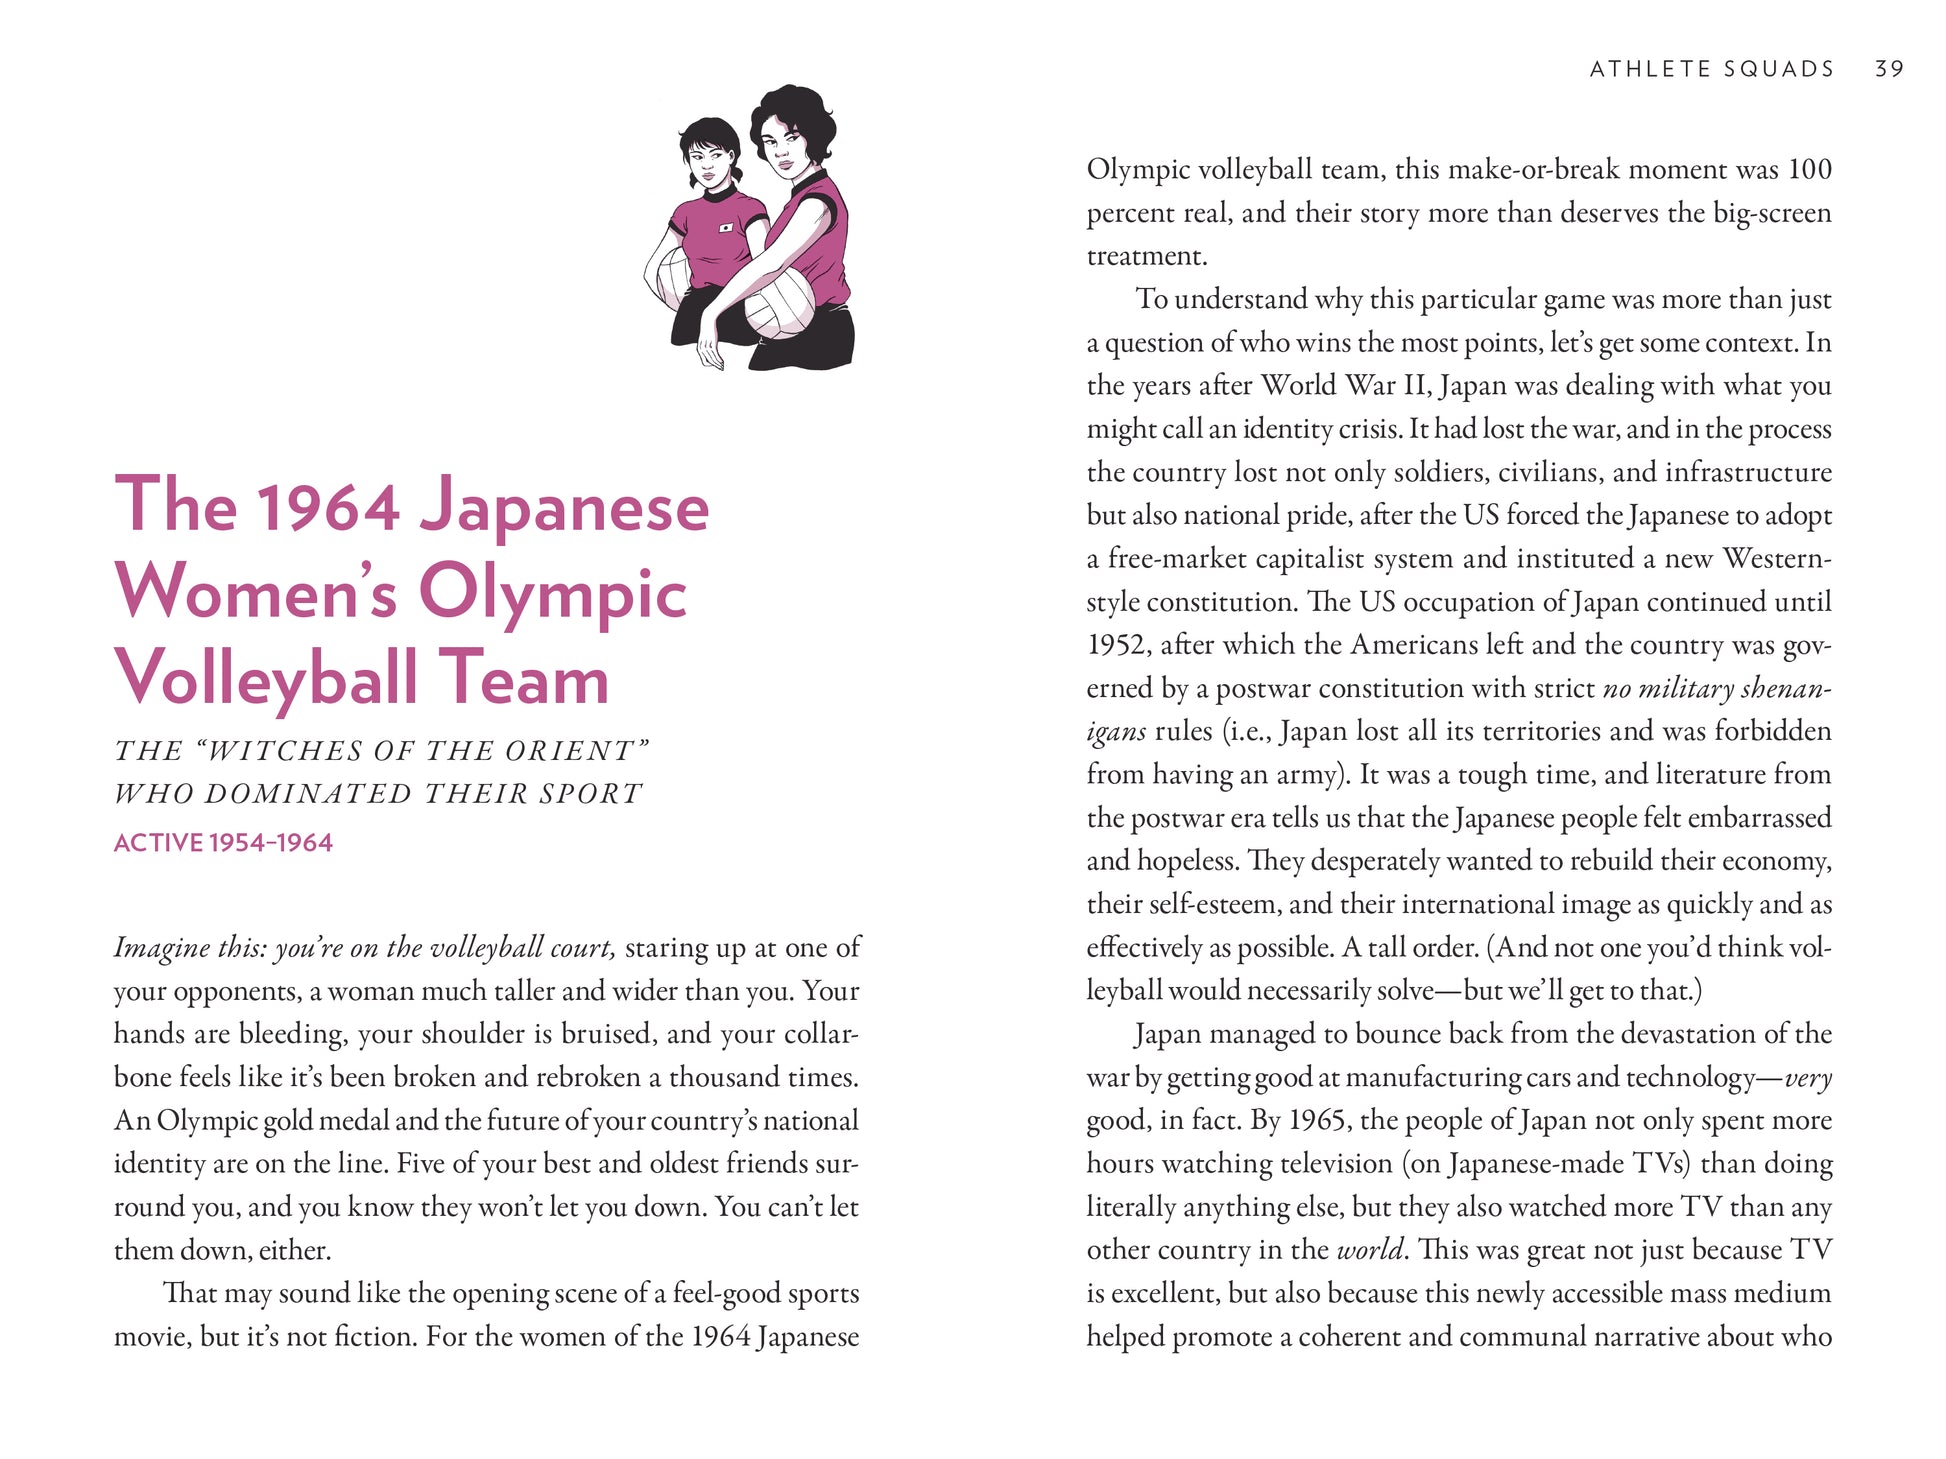 First pages of "The 1964 Japanese Women's Olympic Volleyball Team."